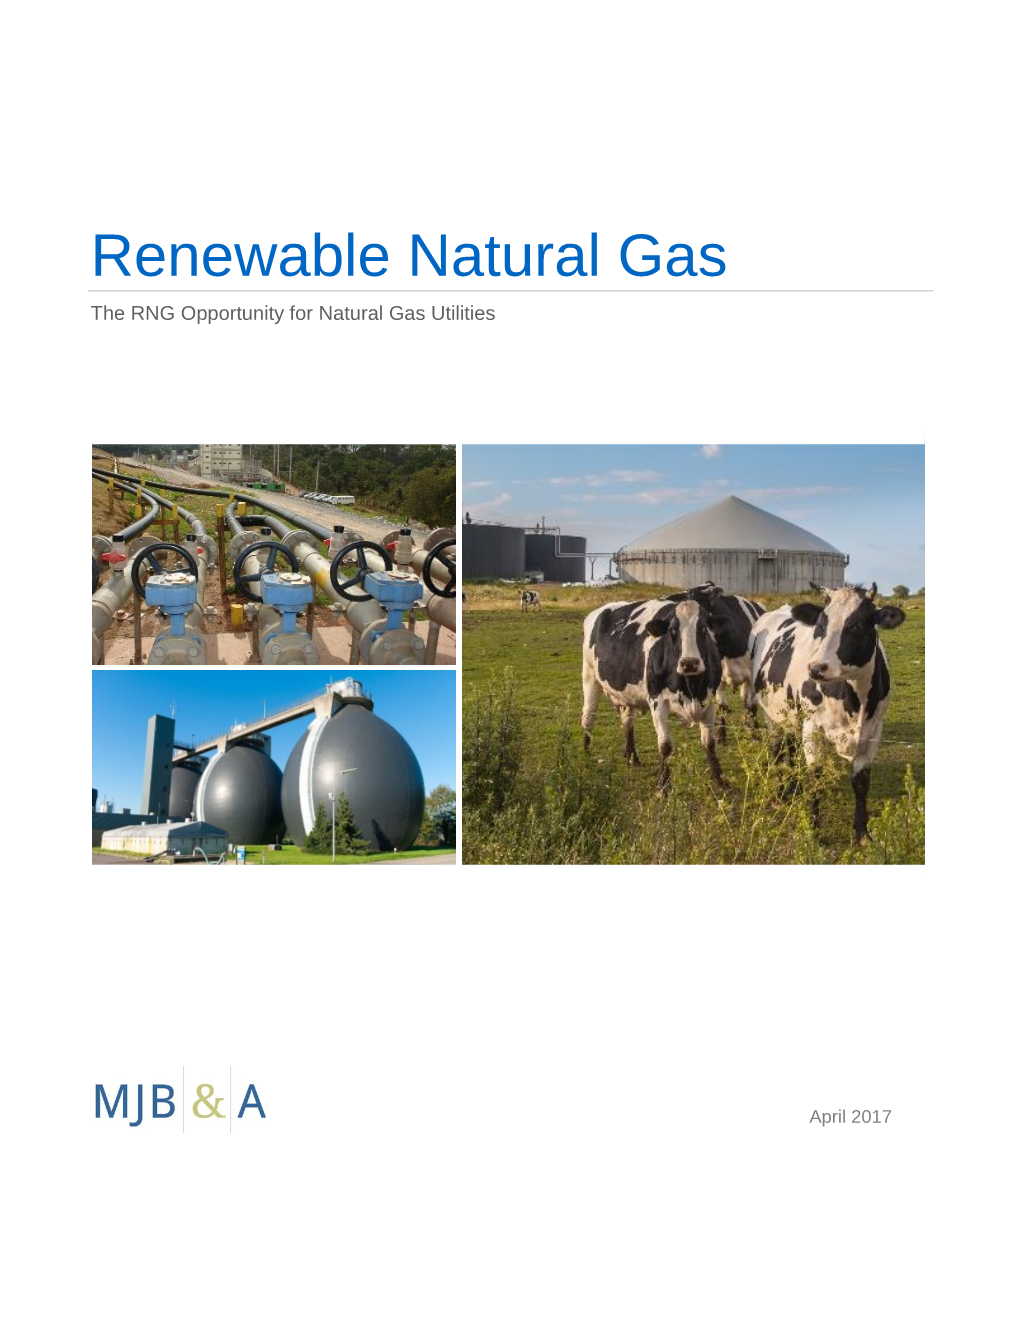 Renewable Natural Gas the RNG Opportunity for Natural Gas Utilities